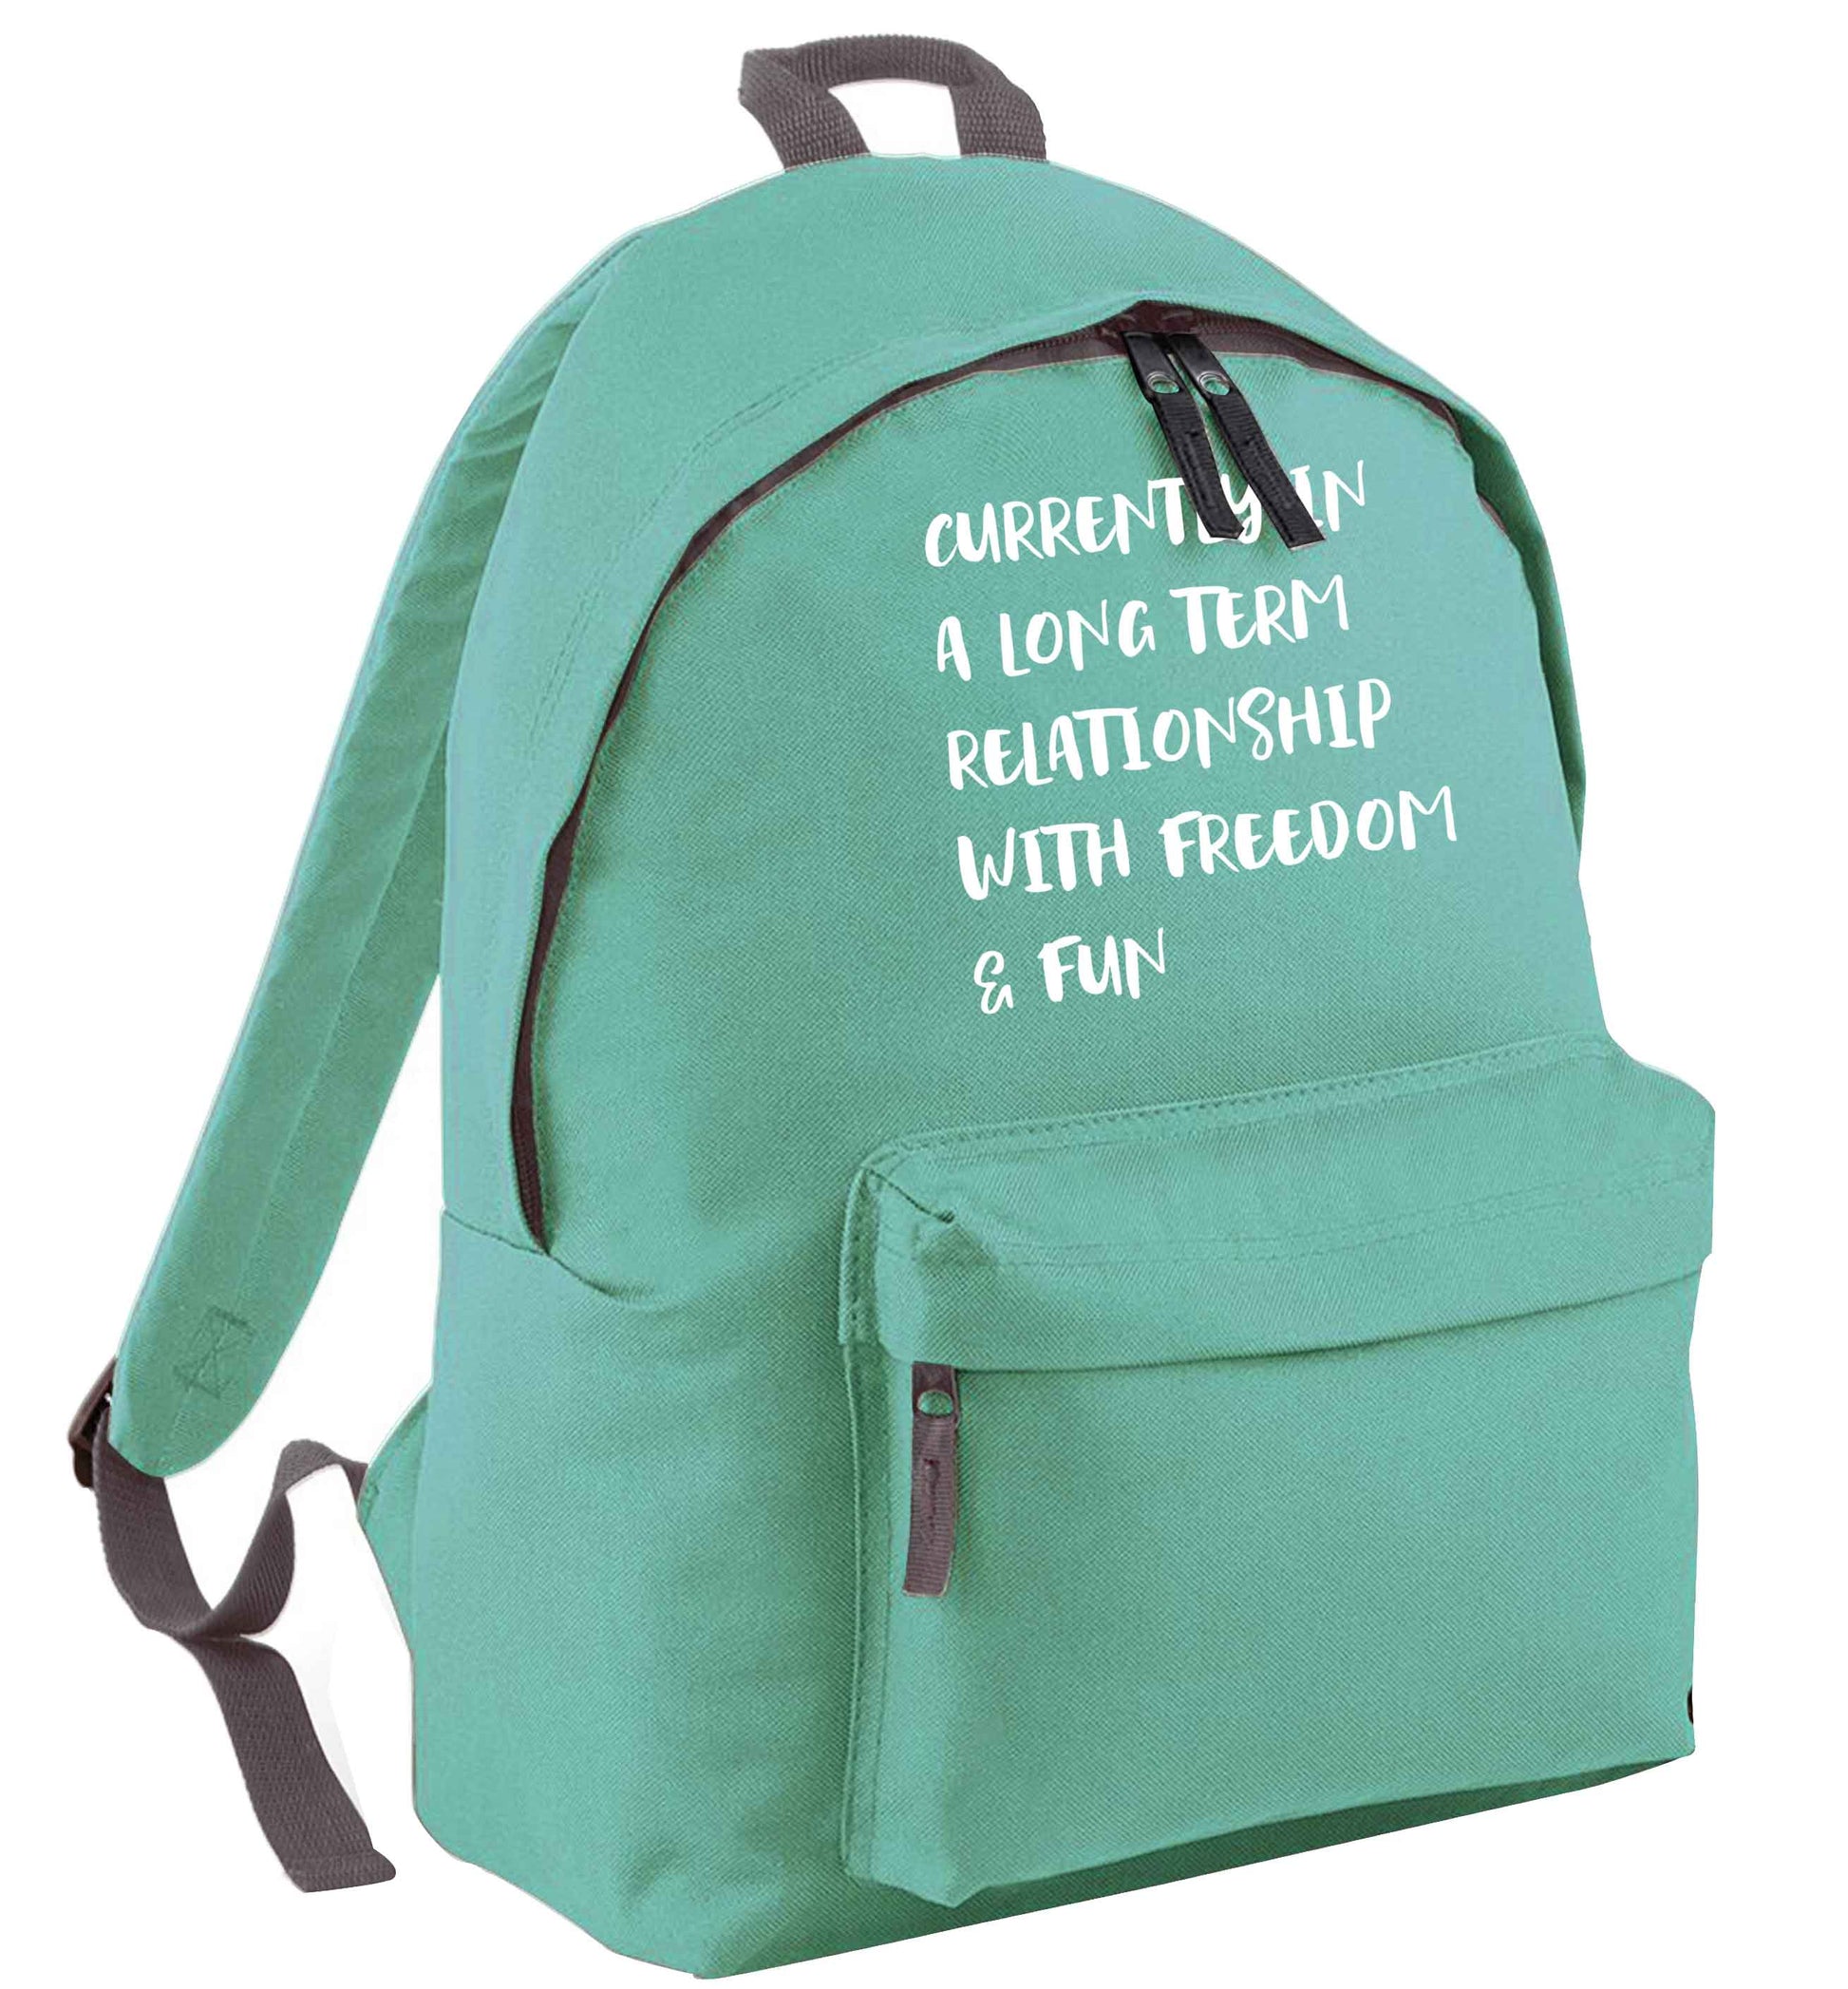 Currently in a long term relationship with freedom and fun mint adults backpack